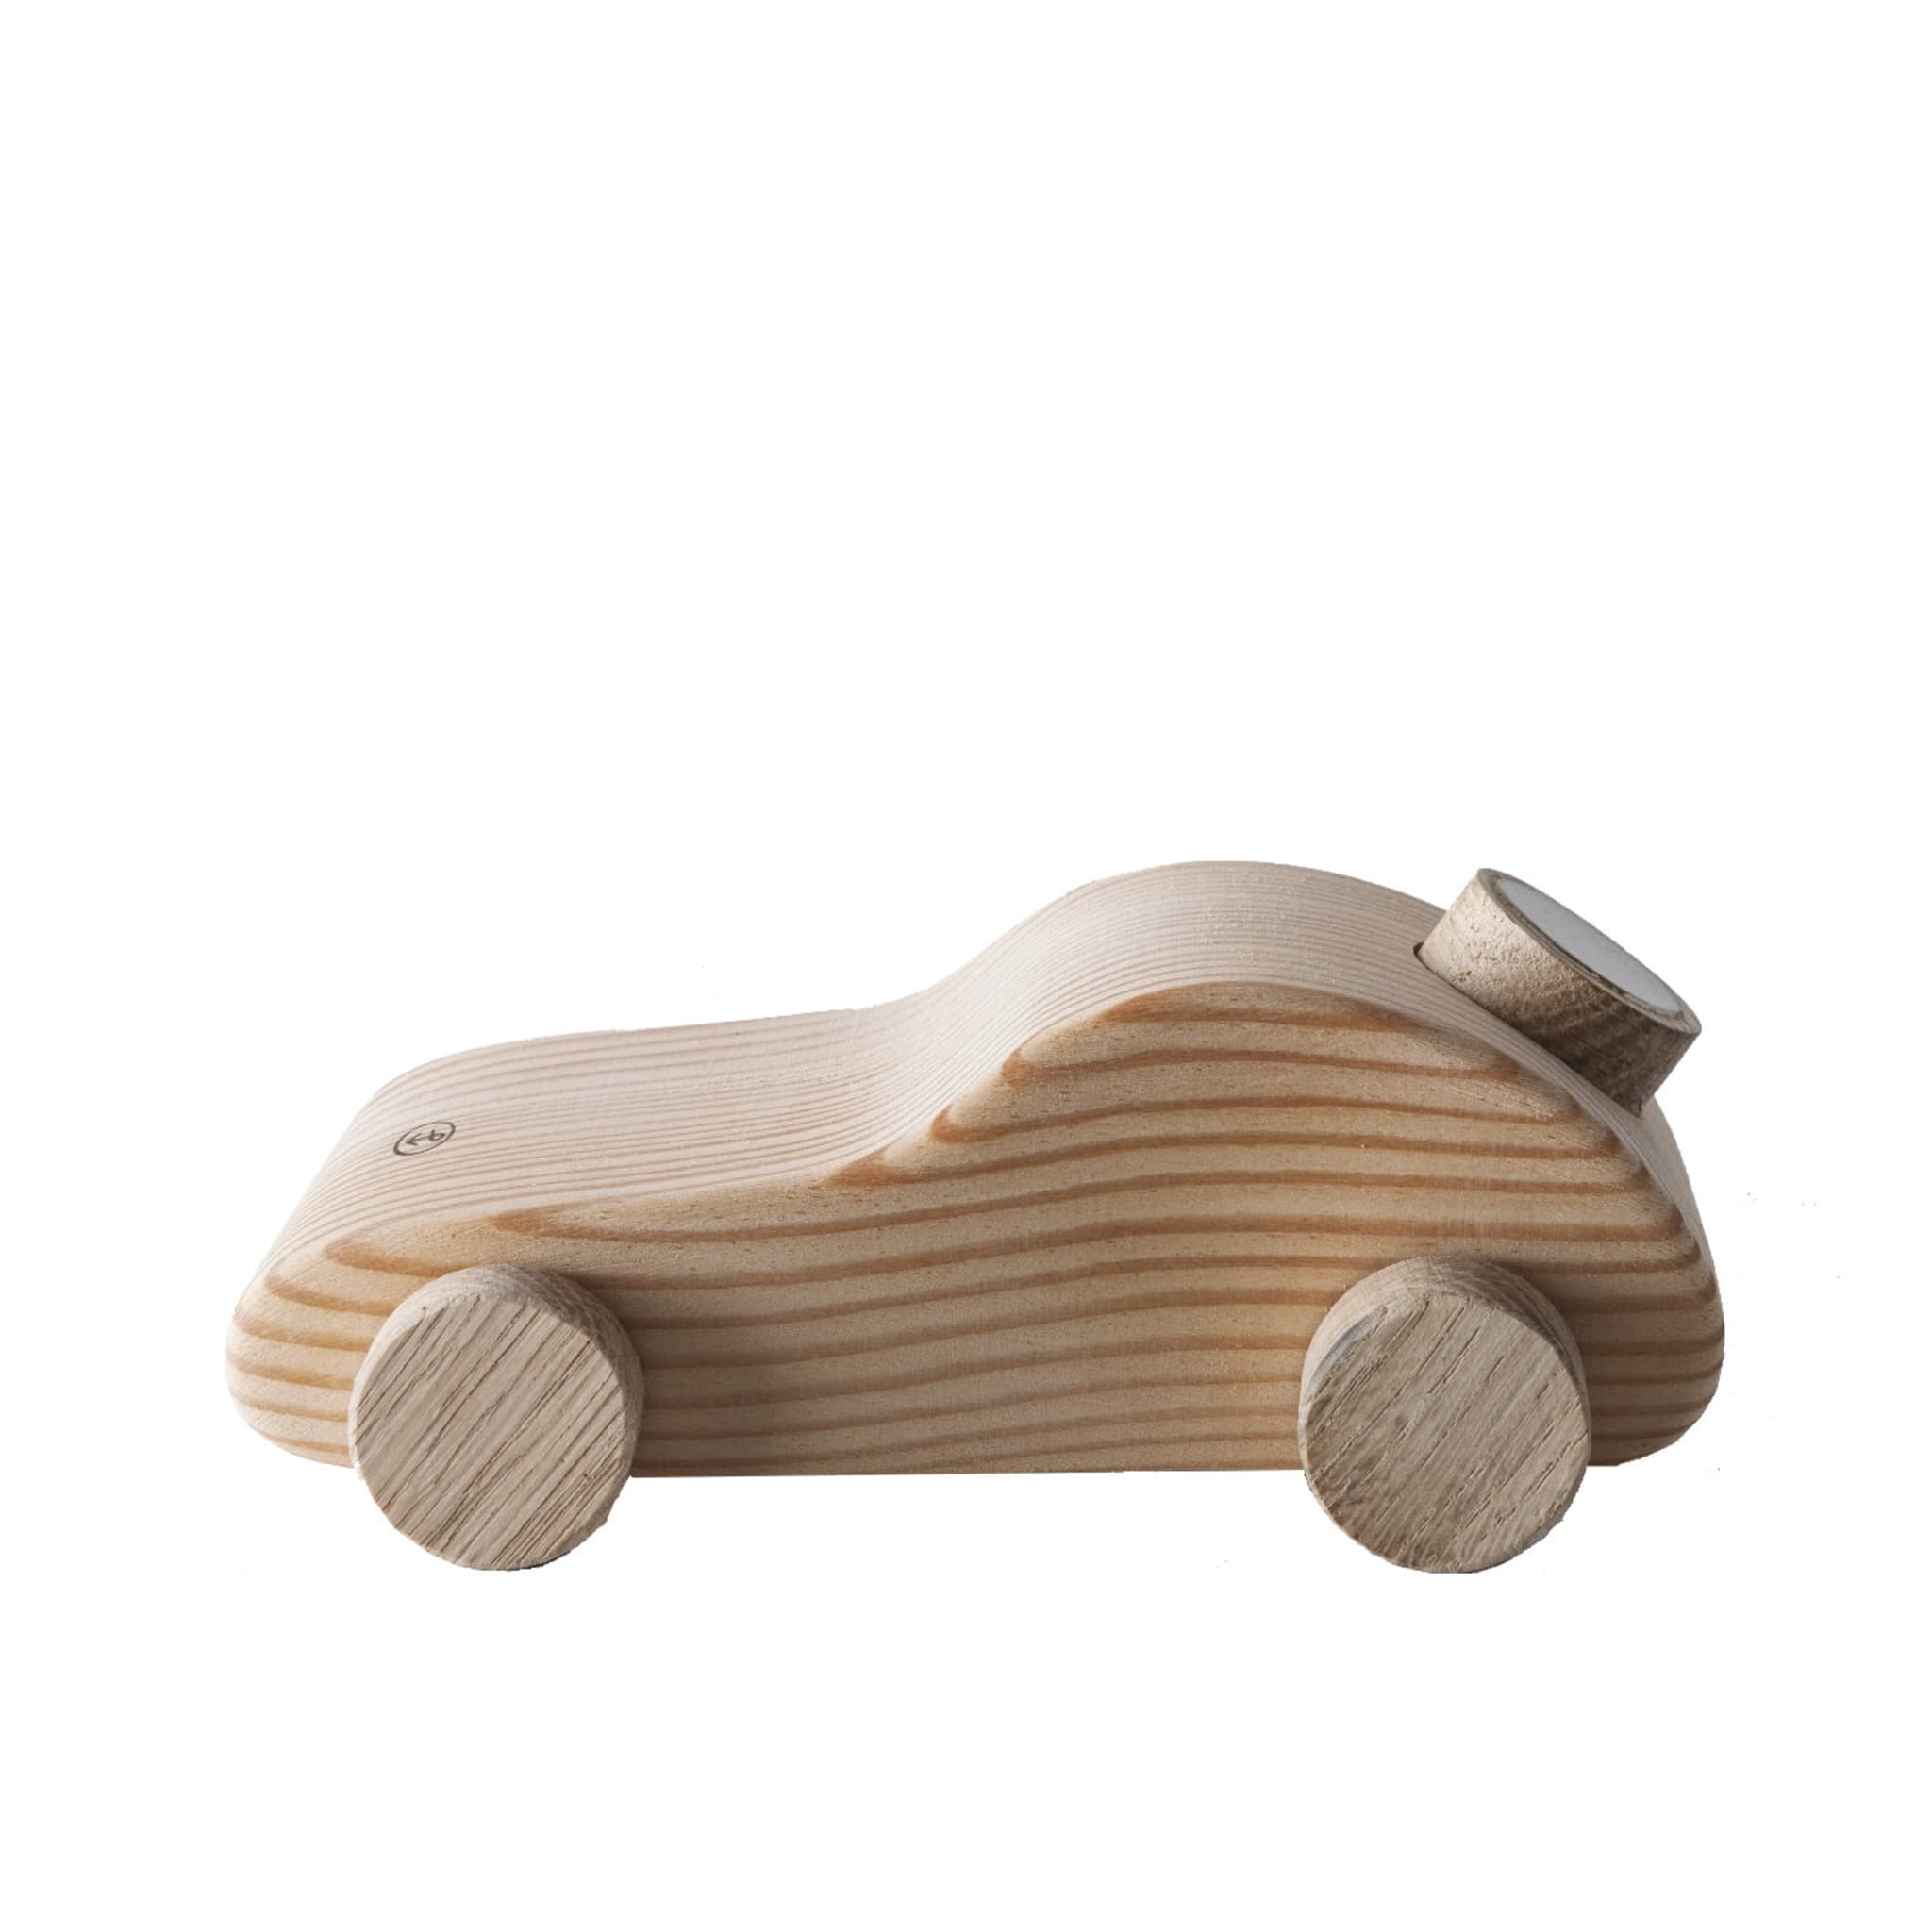 Lido Toy Car with Light by Matteo Ragni - Set of 2 - Main view